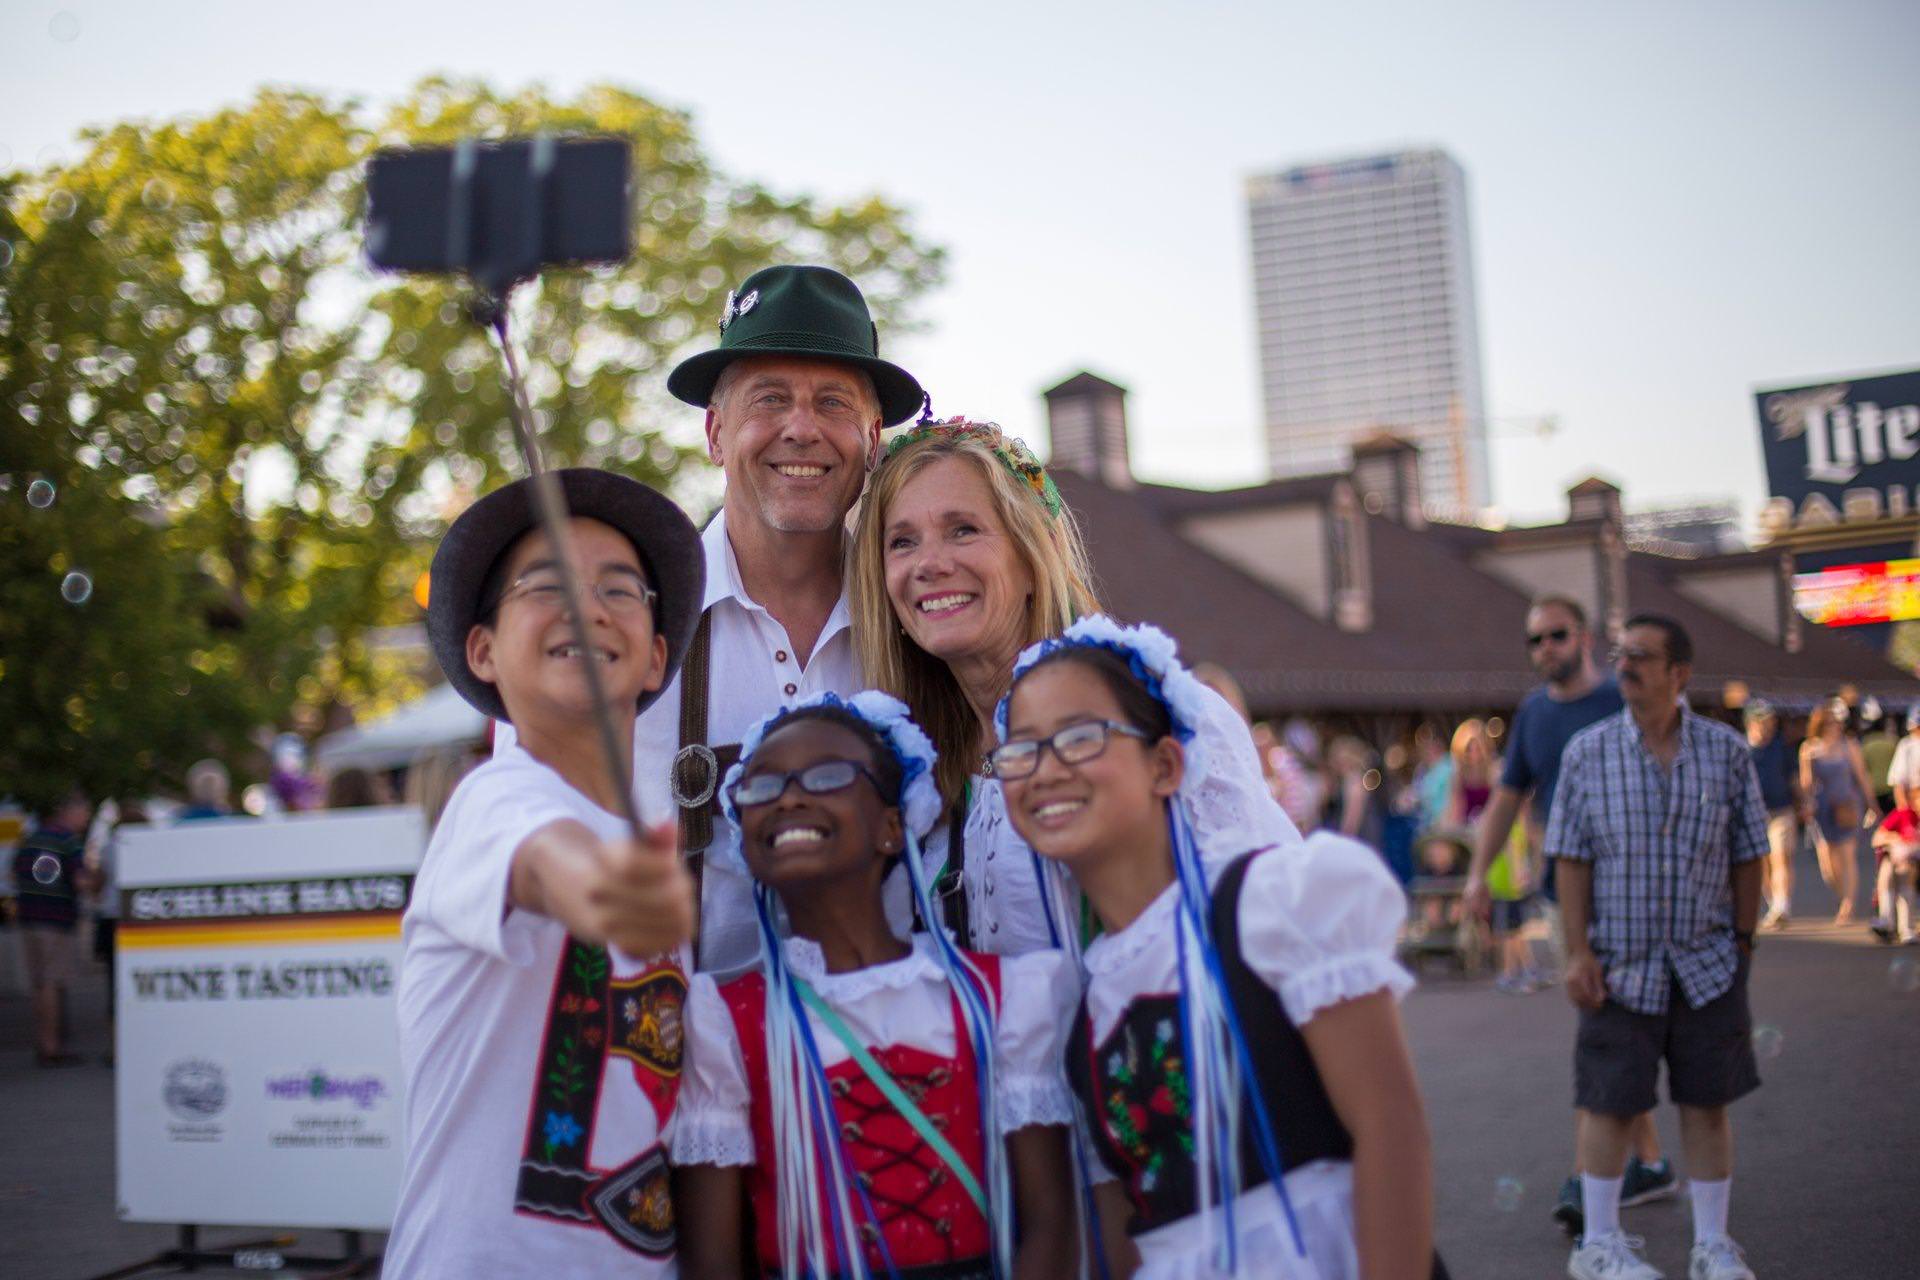 Festivals are a big part of life in Milwaukee